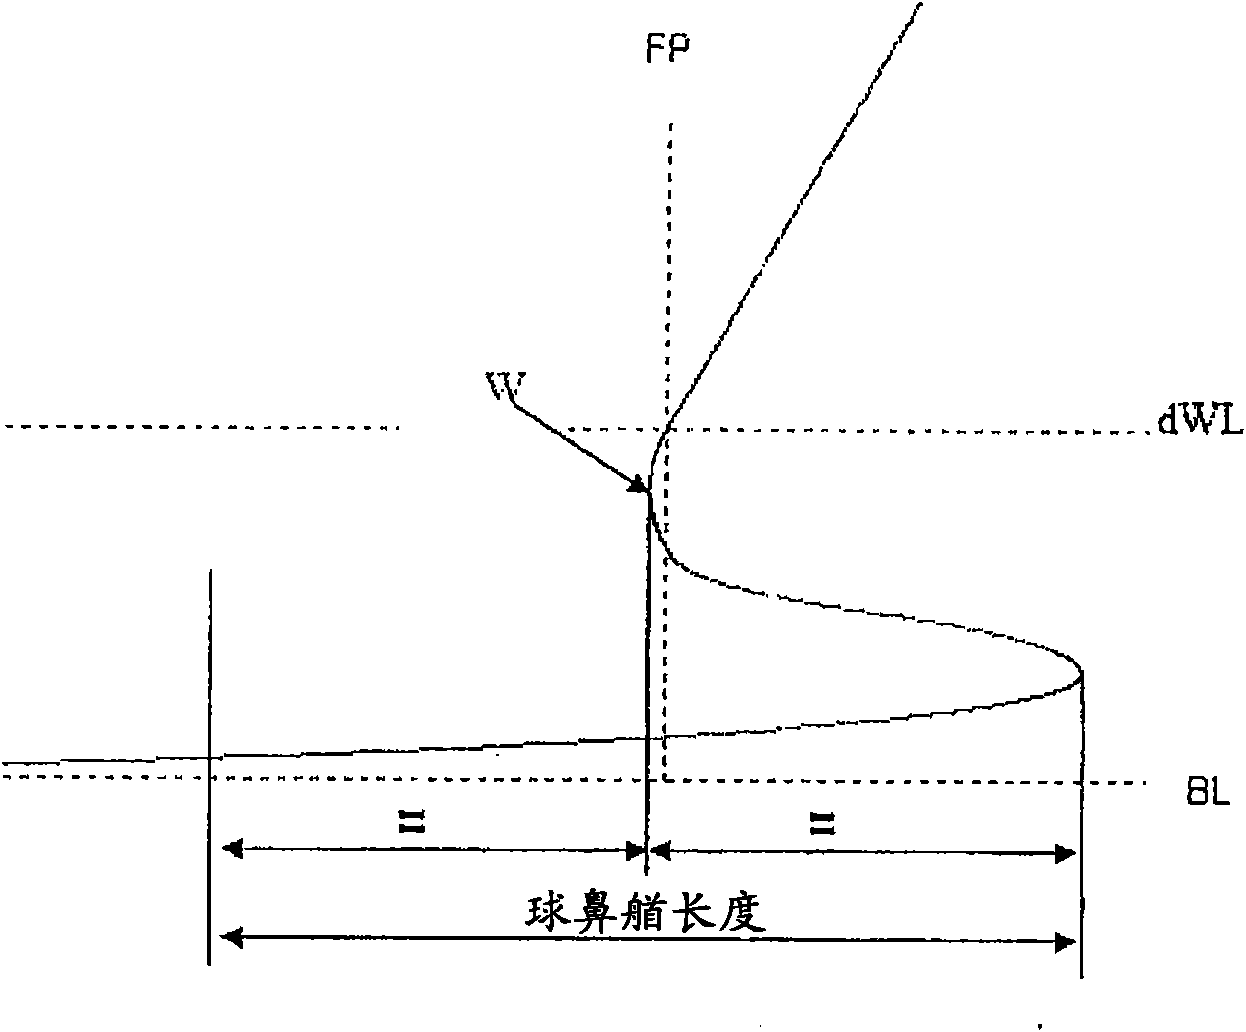 Hull form intended for vessels provided with an air cavity